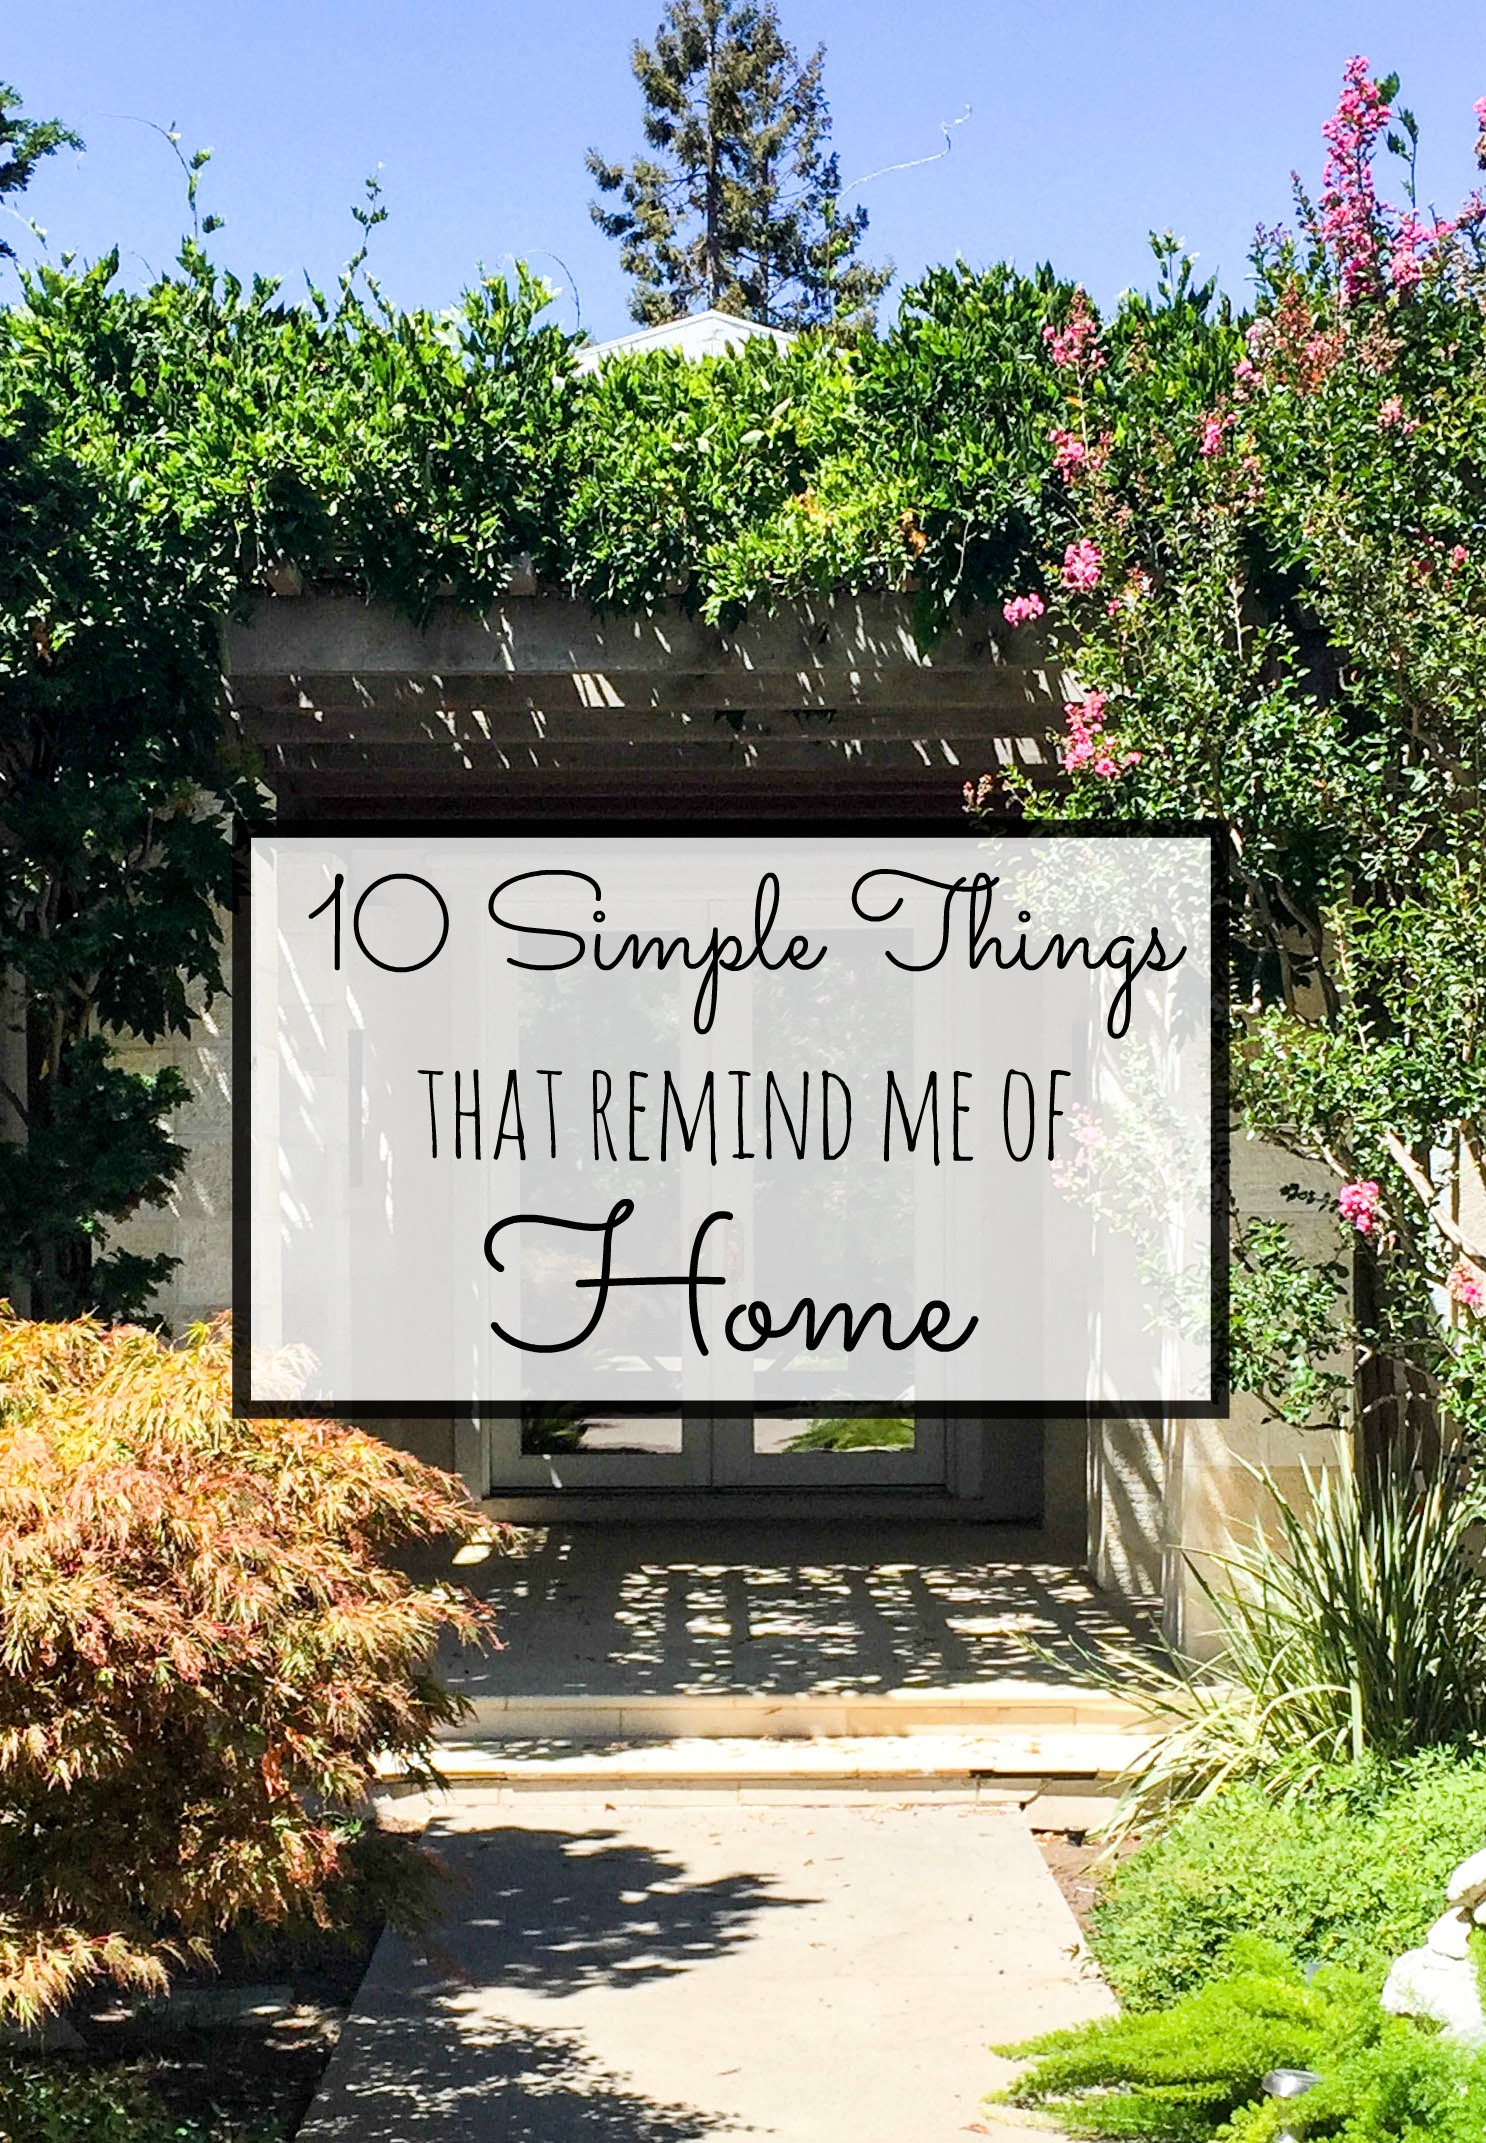 10 simple things that remind me of home- little memories that make it last forever